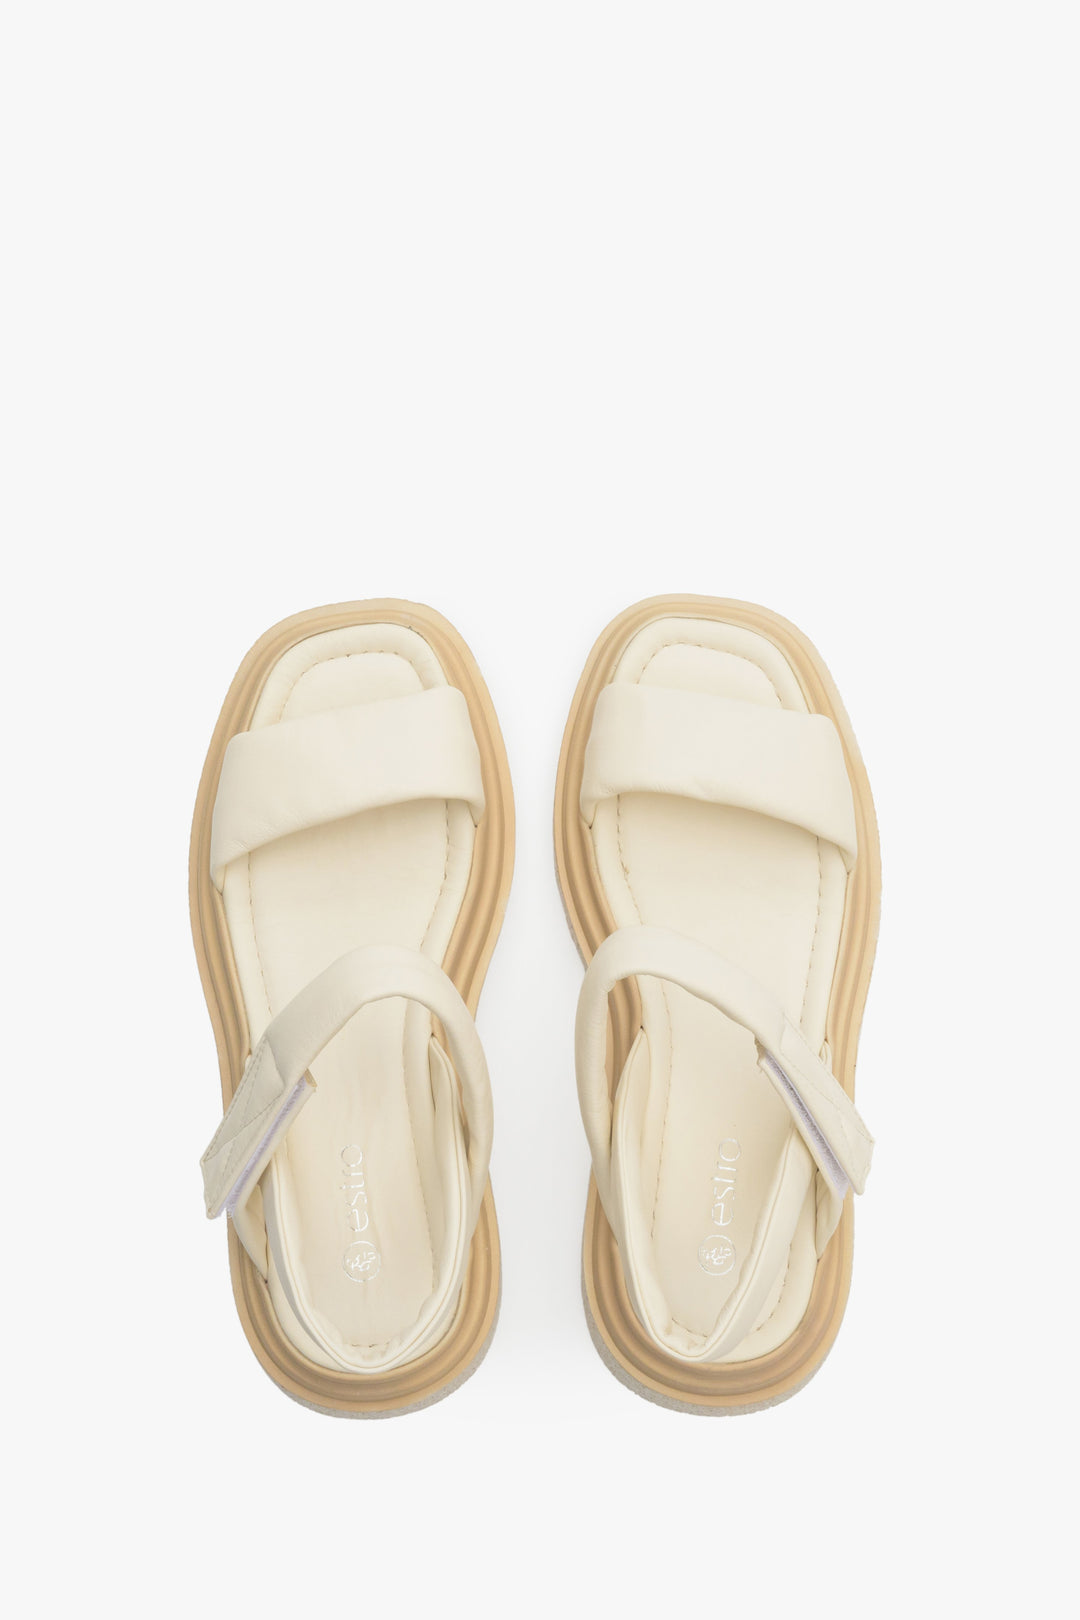 Leather, lightweight Estro women's light beige sandals with hook-and-loop fastening - presentation of footwear from above.